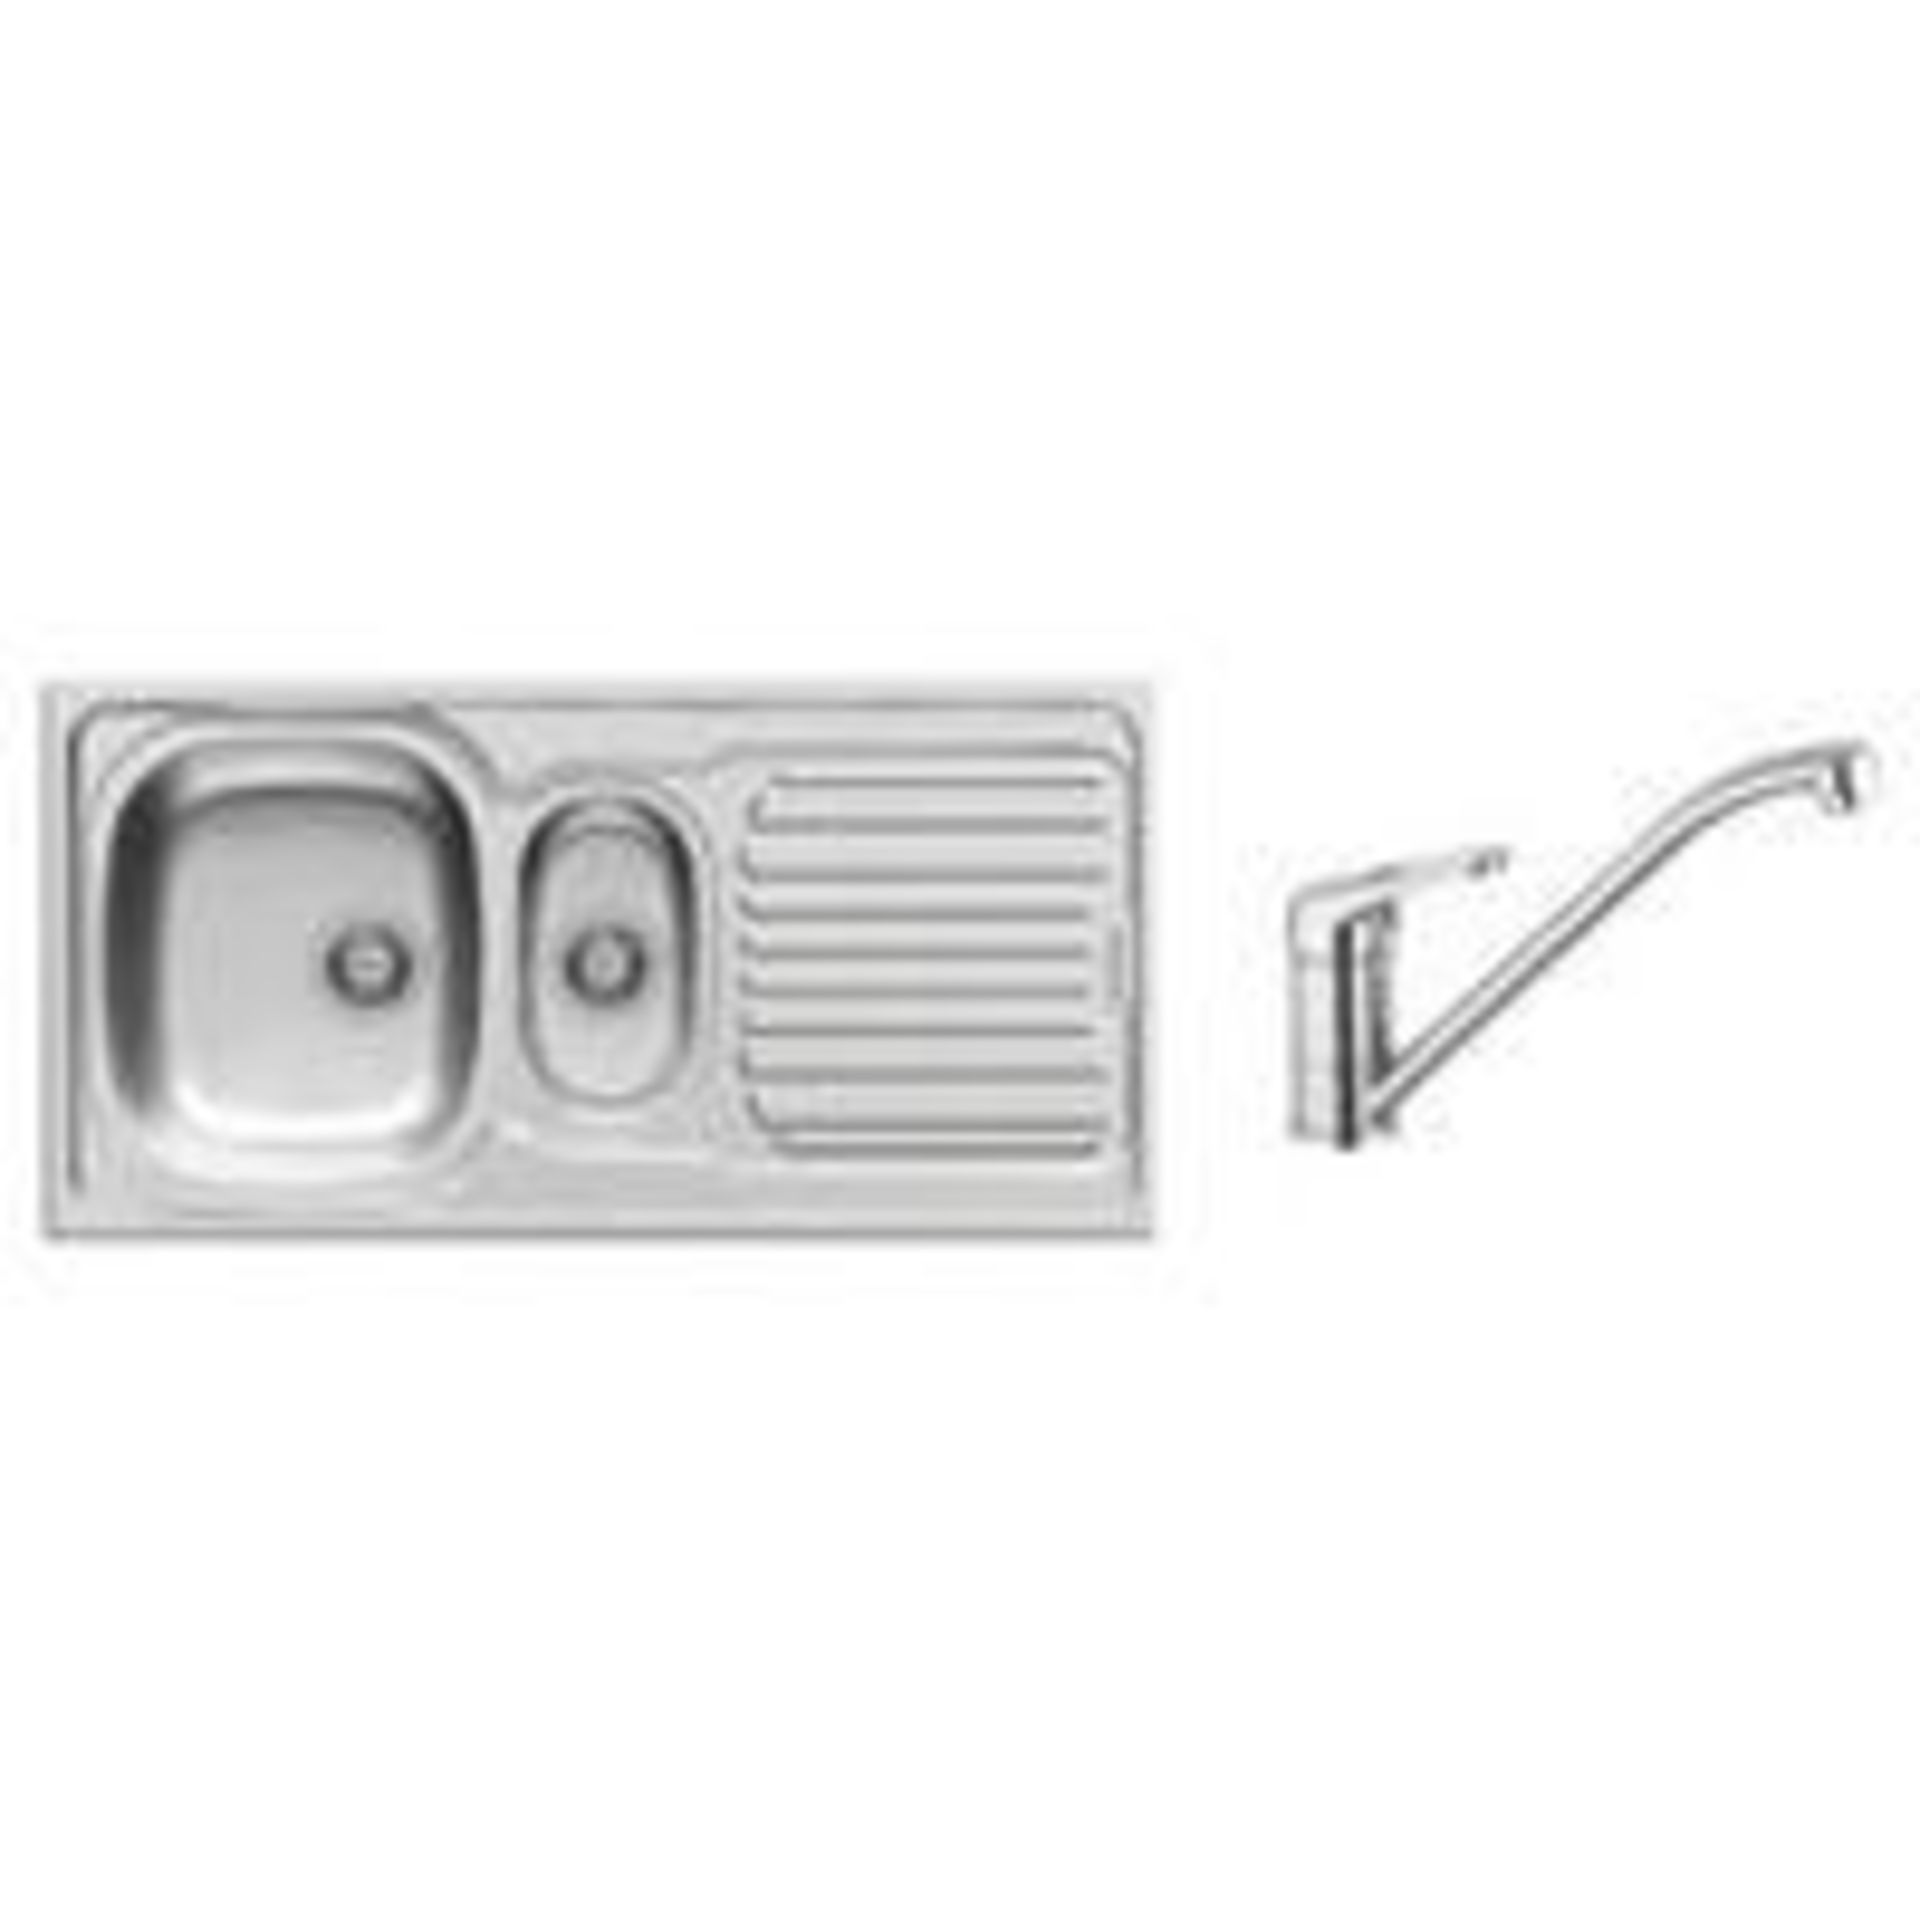 V Brand New Pyramis 1.5 Bowl Stainless Steel Sink and Tap RRP £89.99